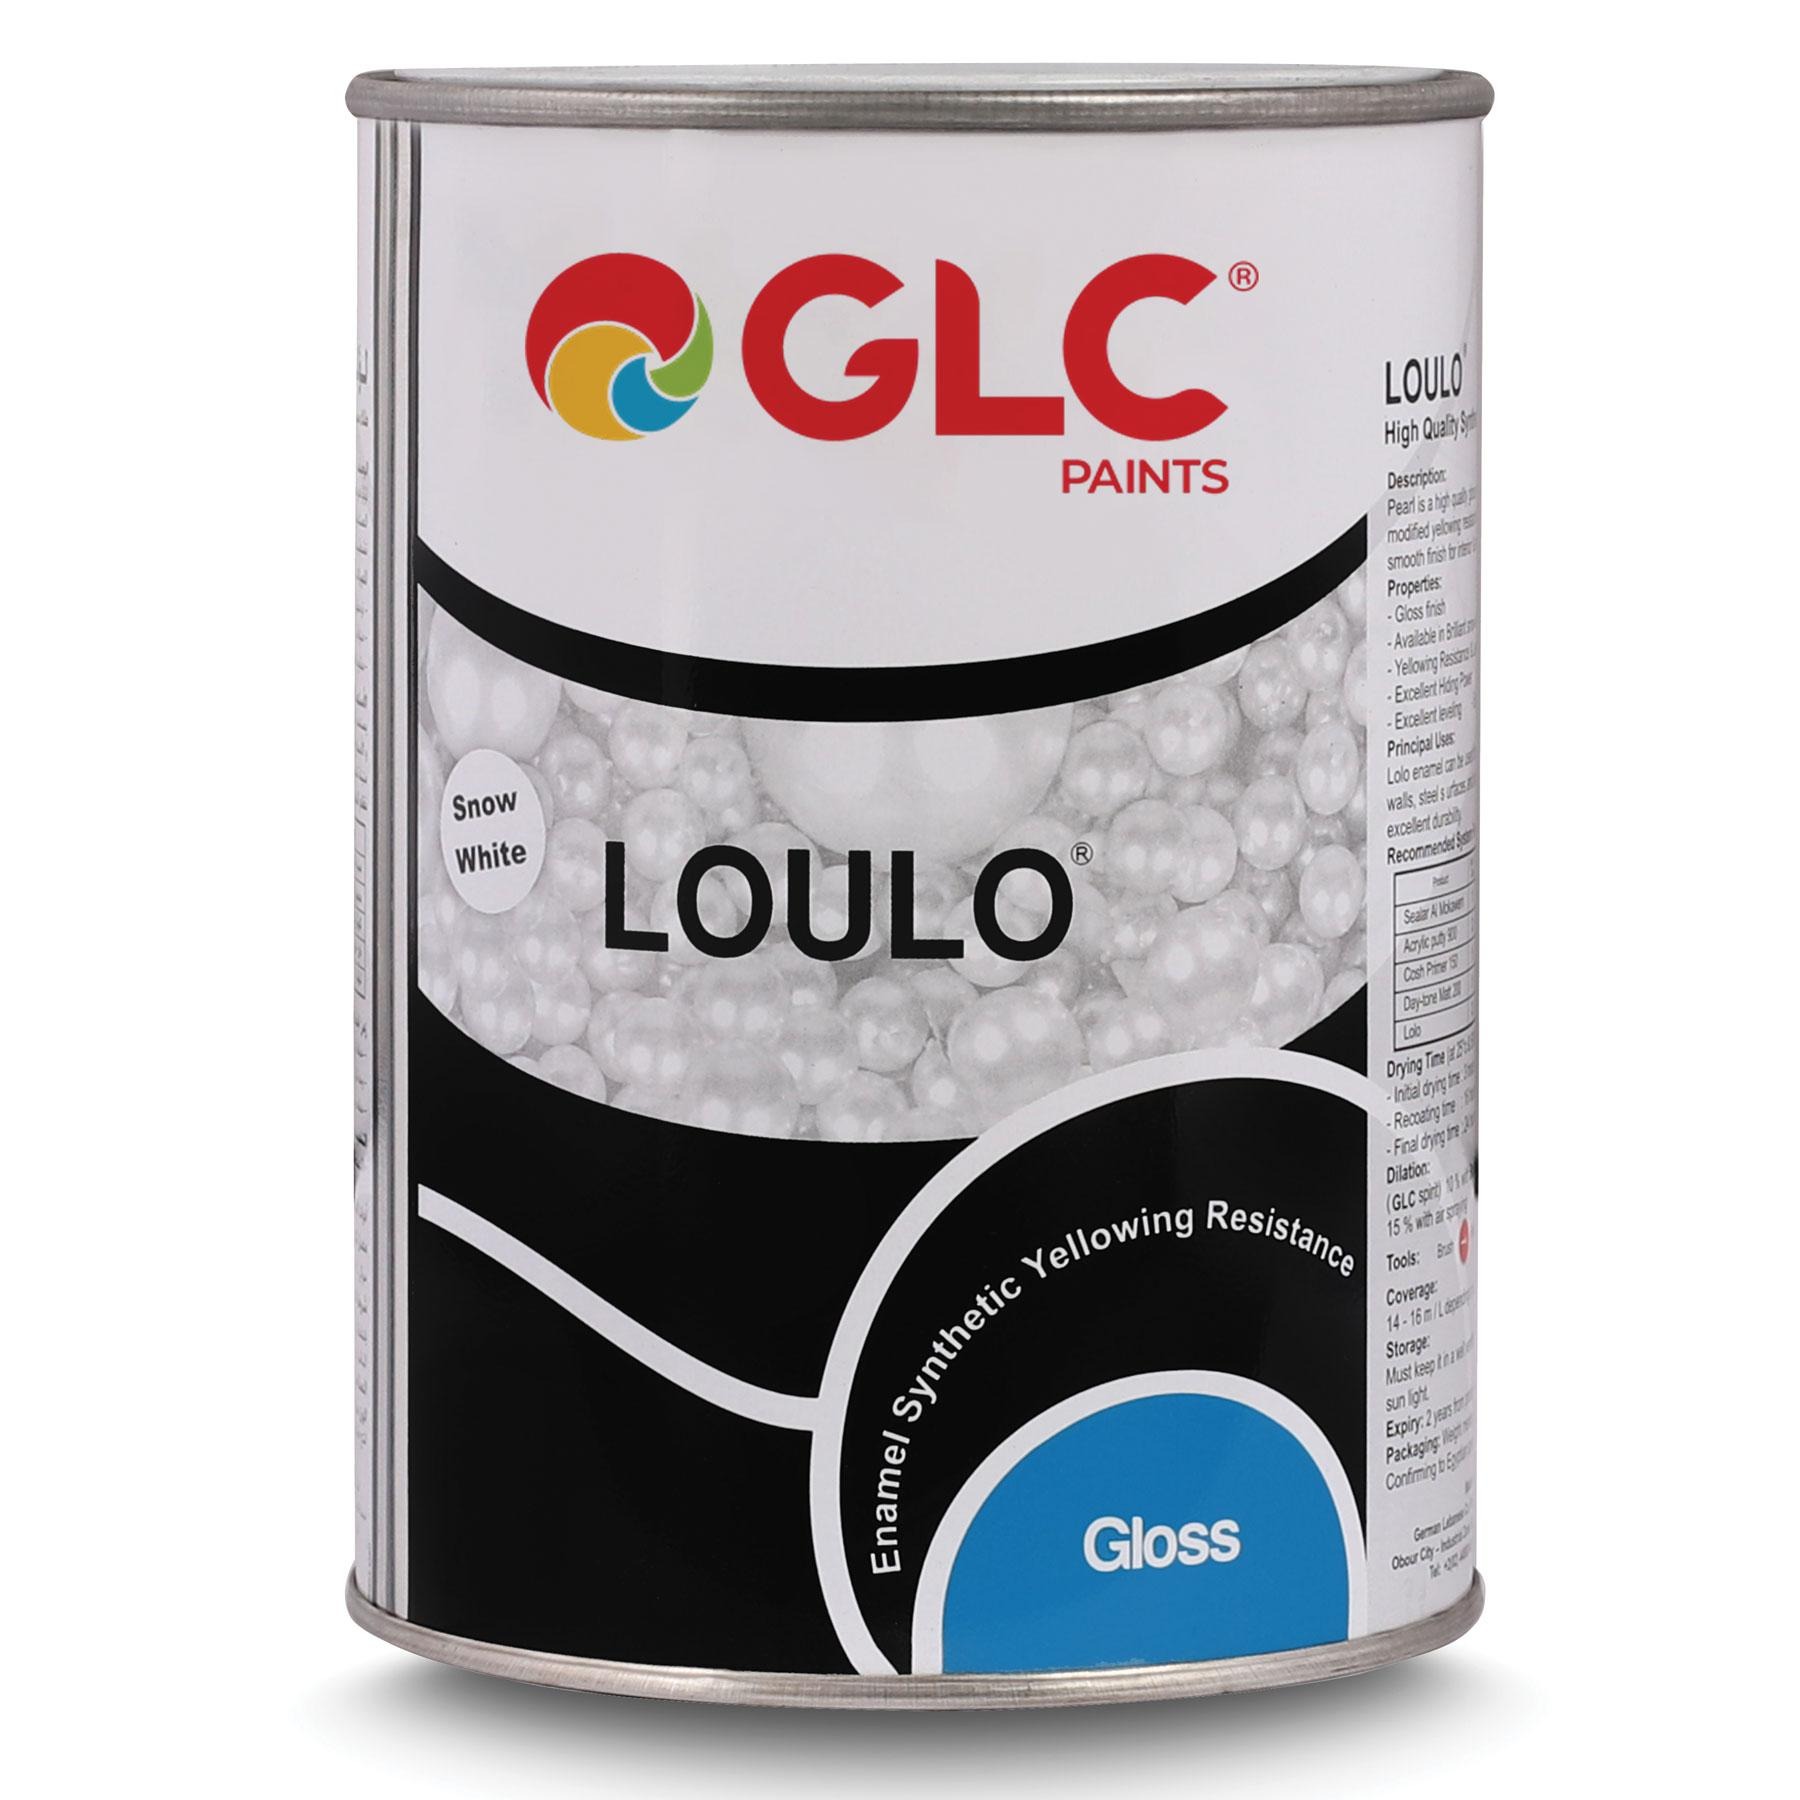 Loulo Painting - Cartoon 2L